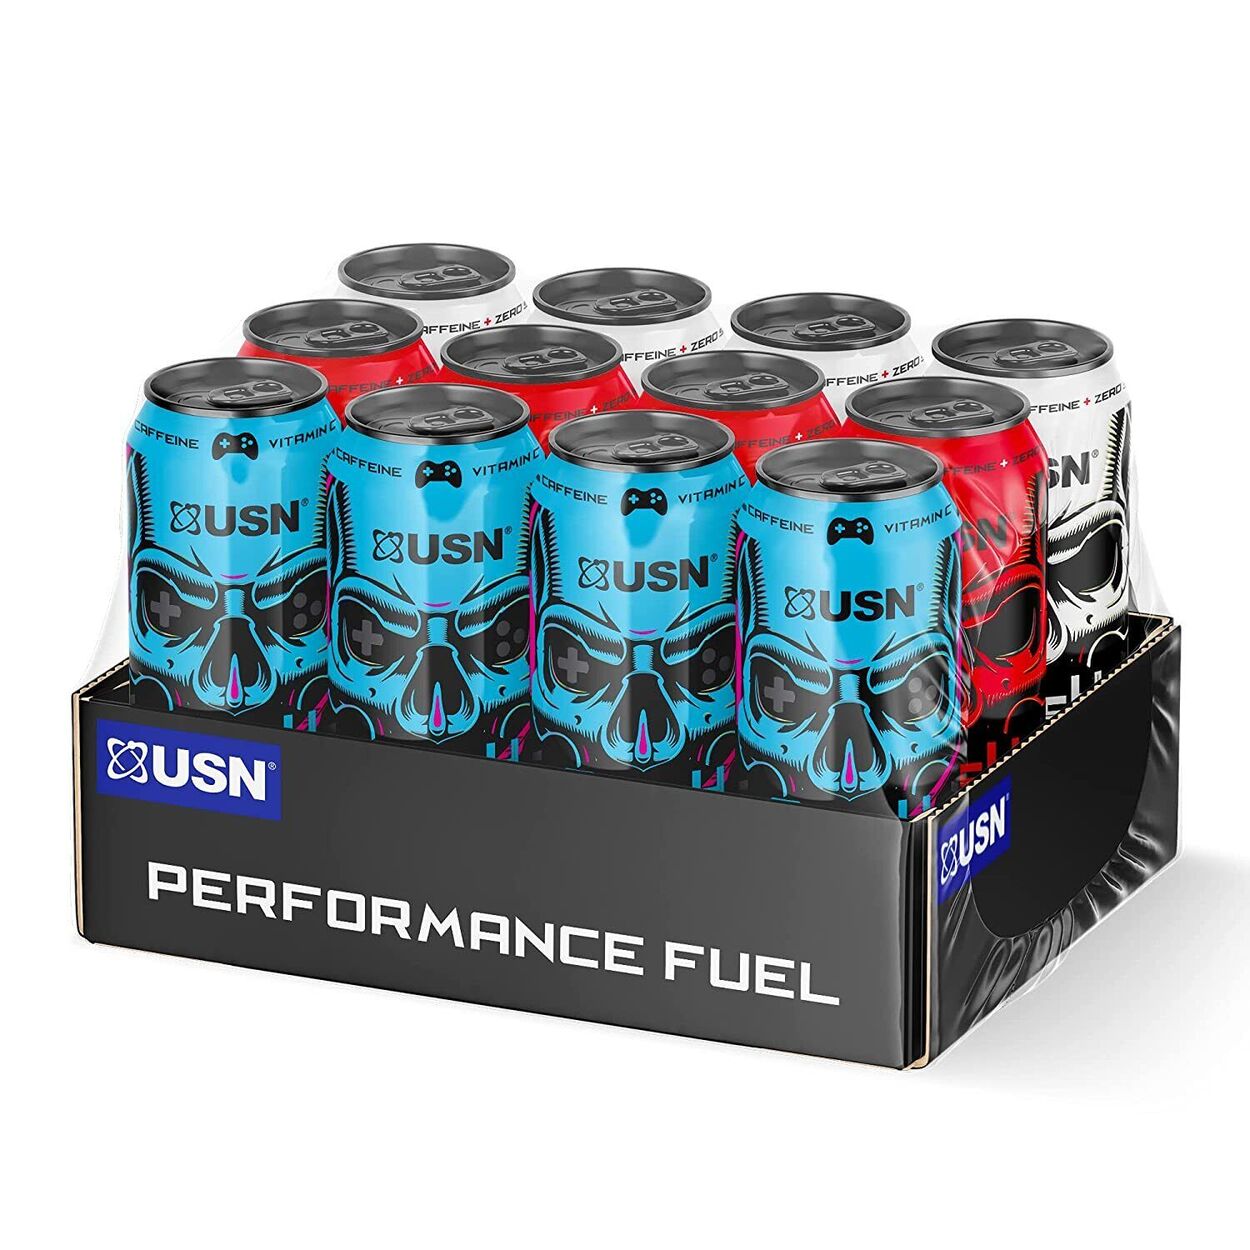 A 12-pack of Qhush energy drinks.